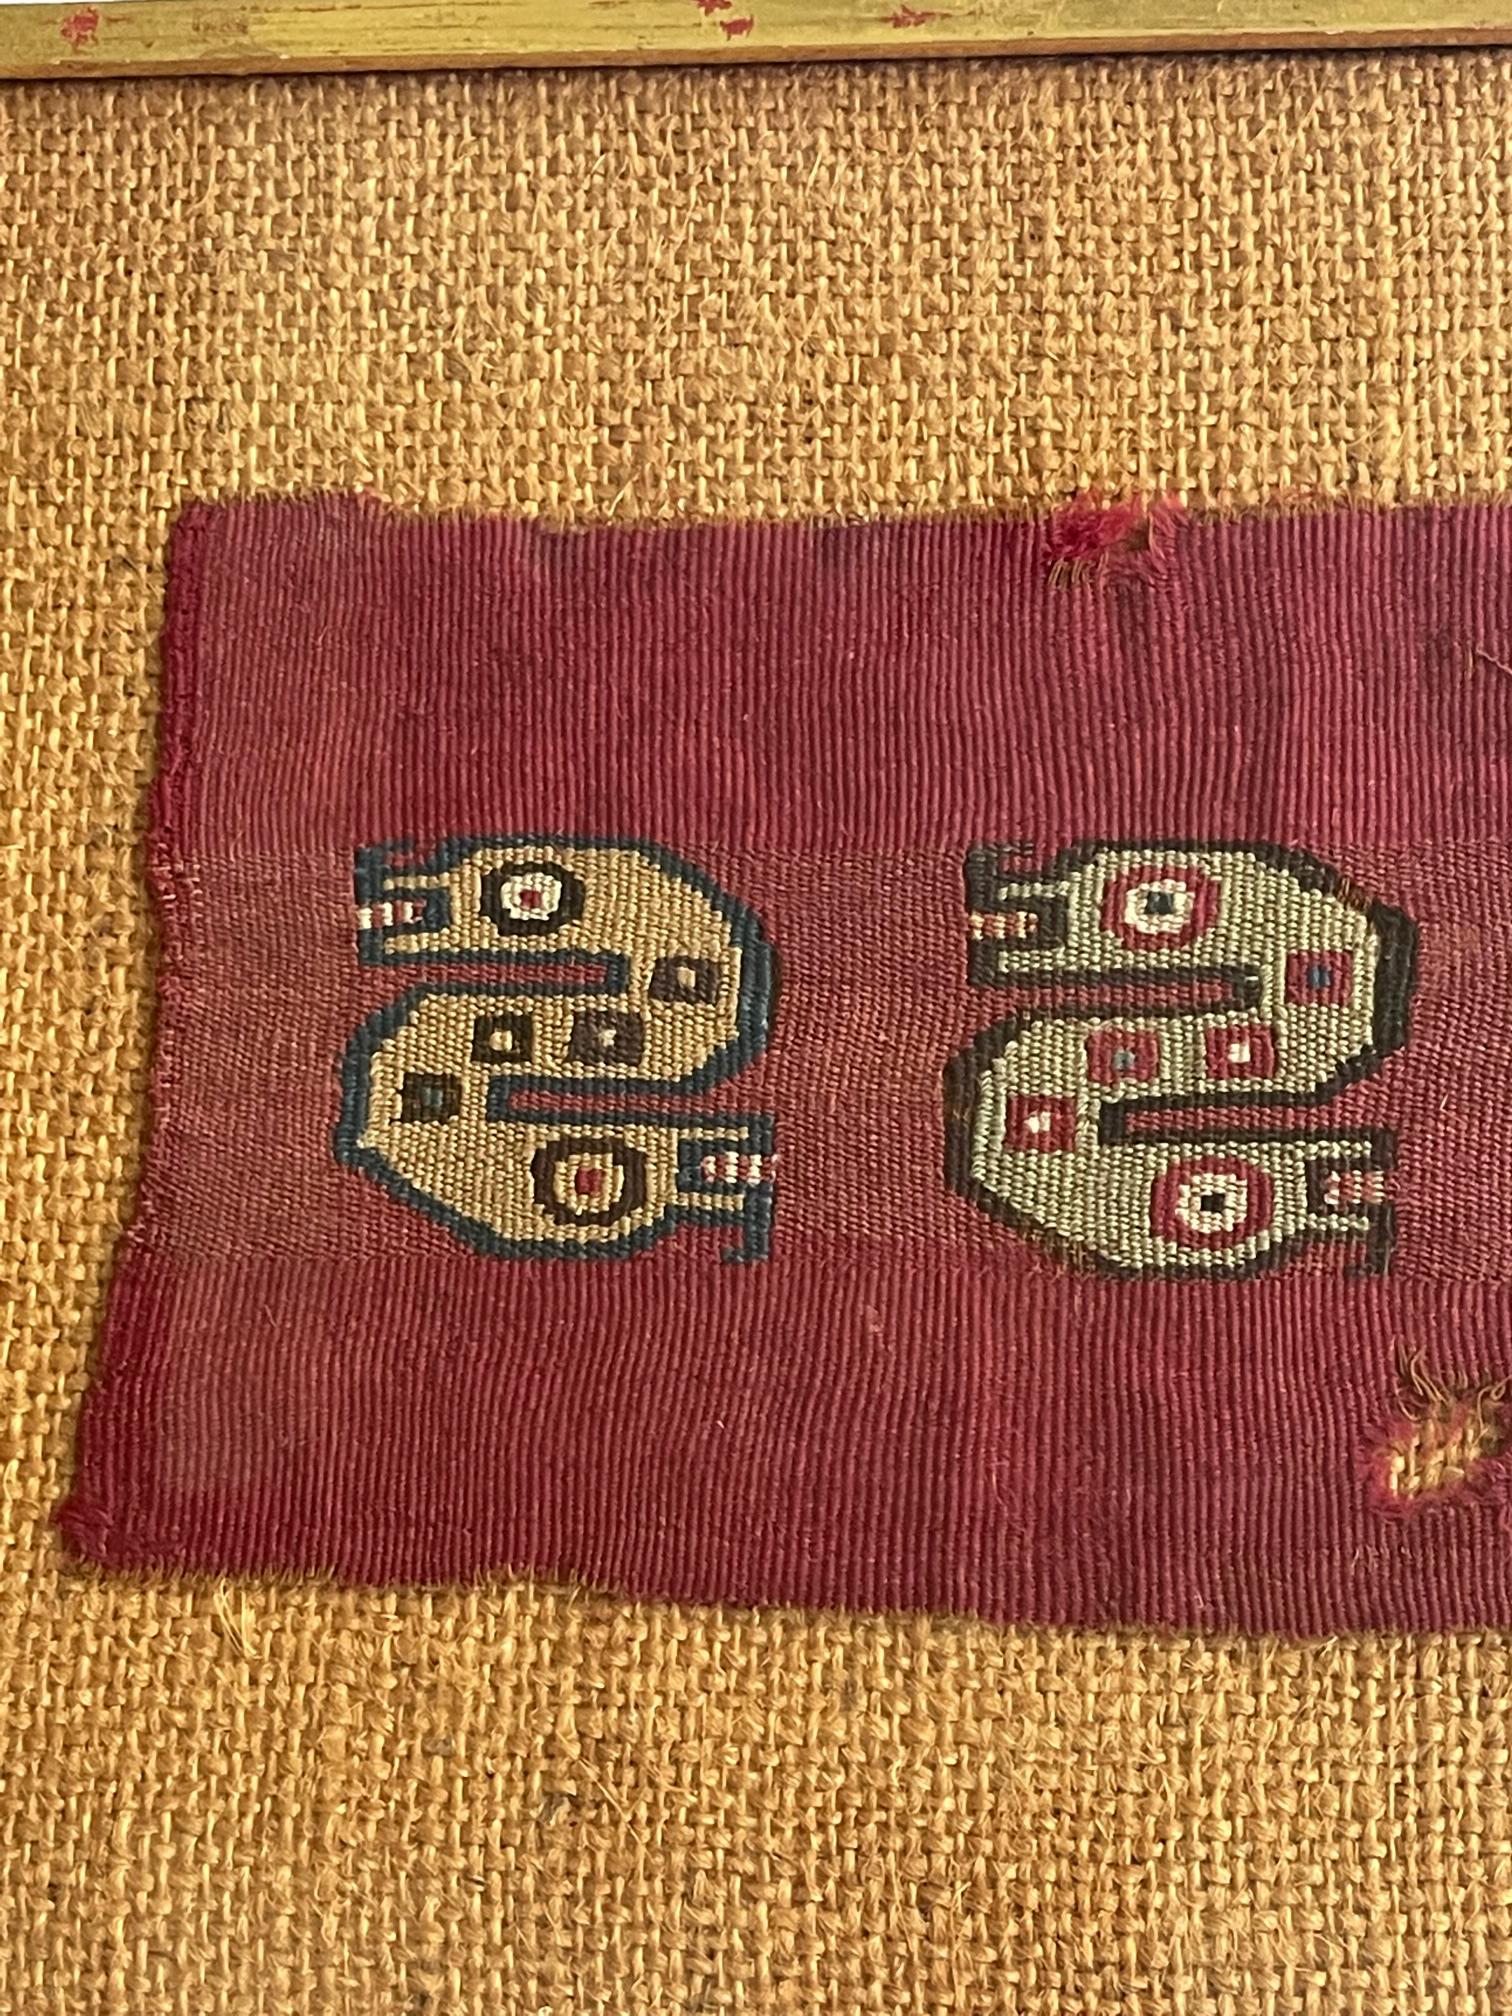 Hand-Woven Two Framed Pre-Columbian Textile Fragment Chancay Culture Peru For Sale